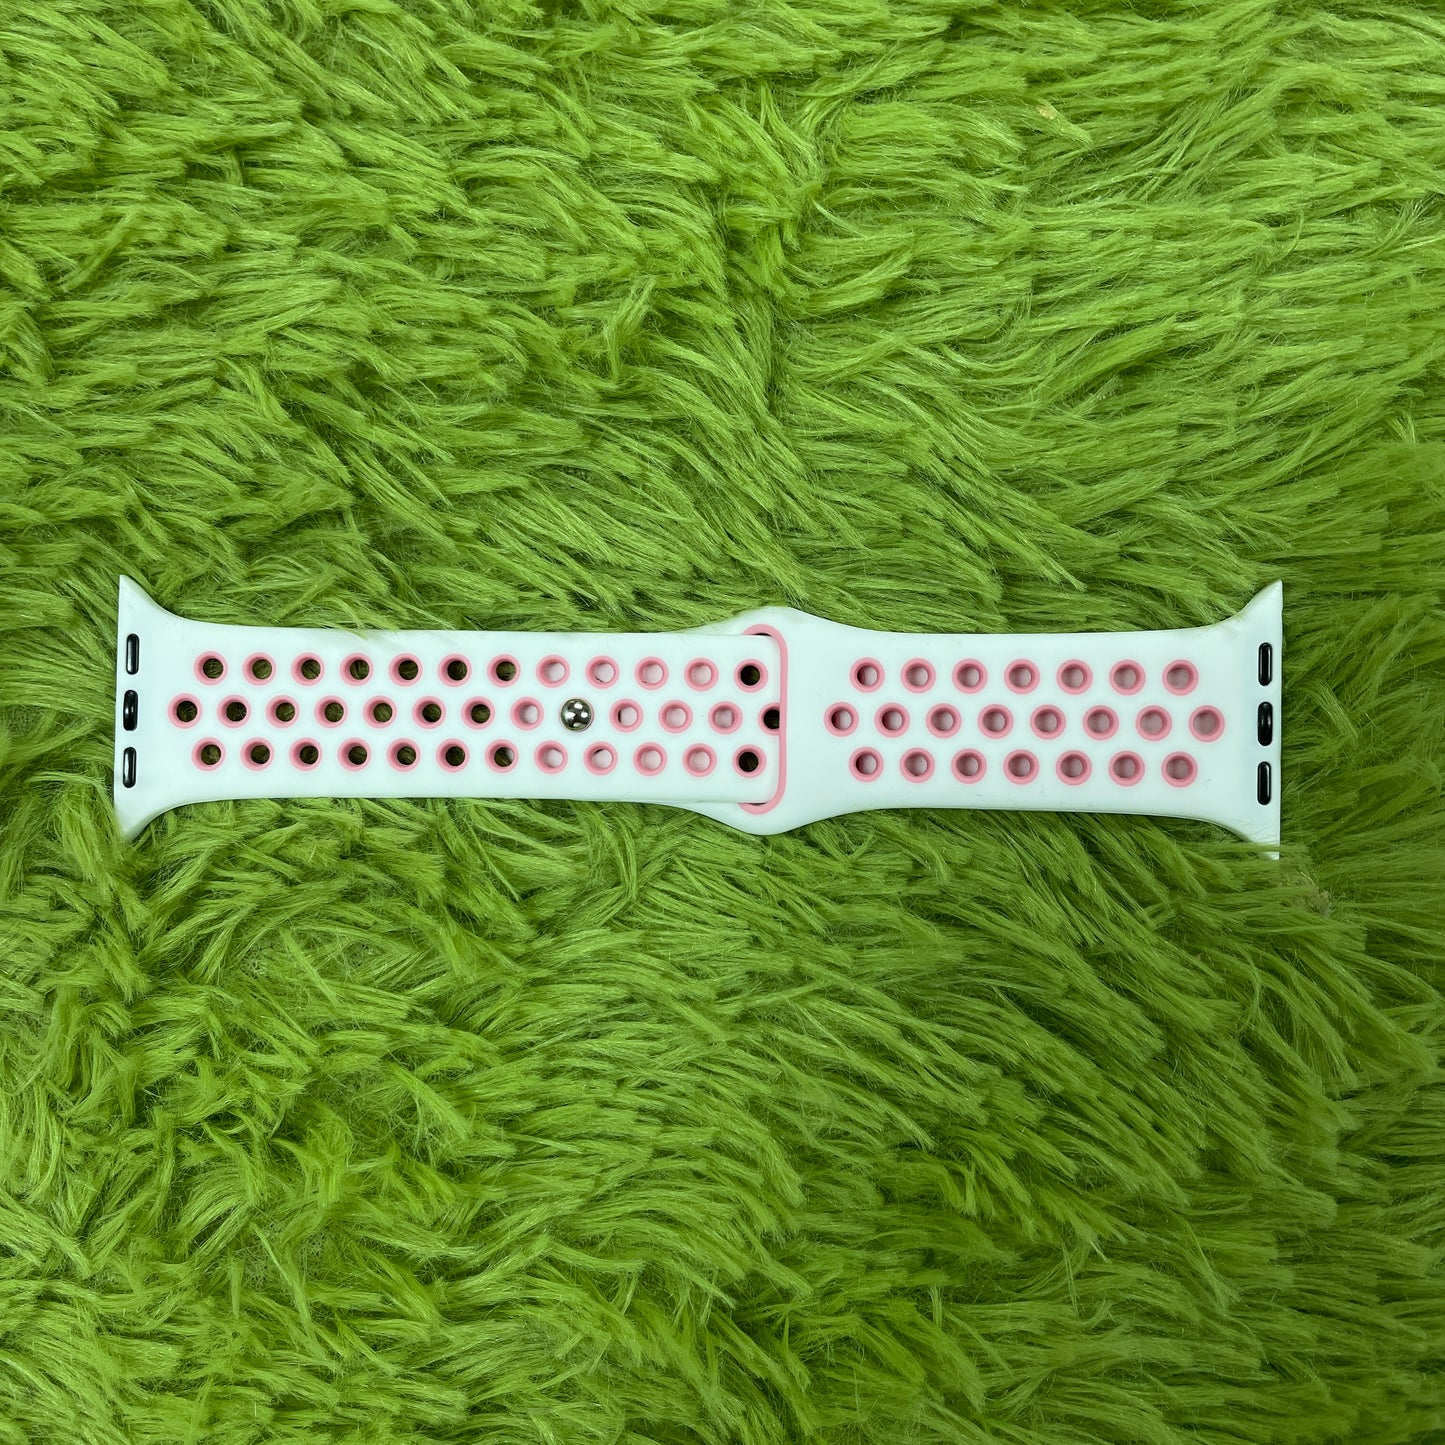 Apple Watch Colorful Bands